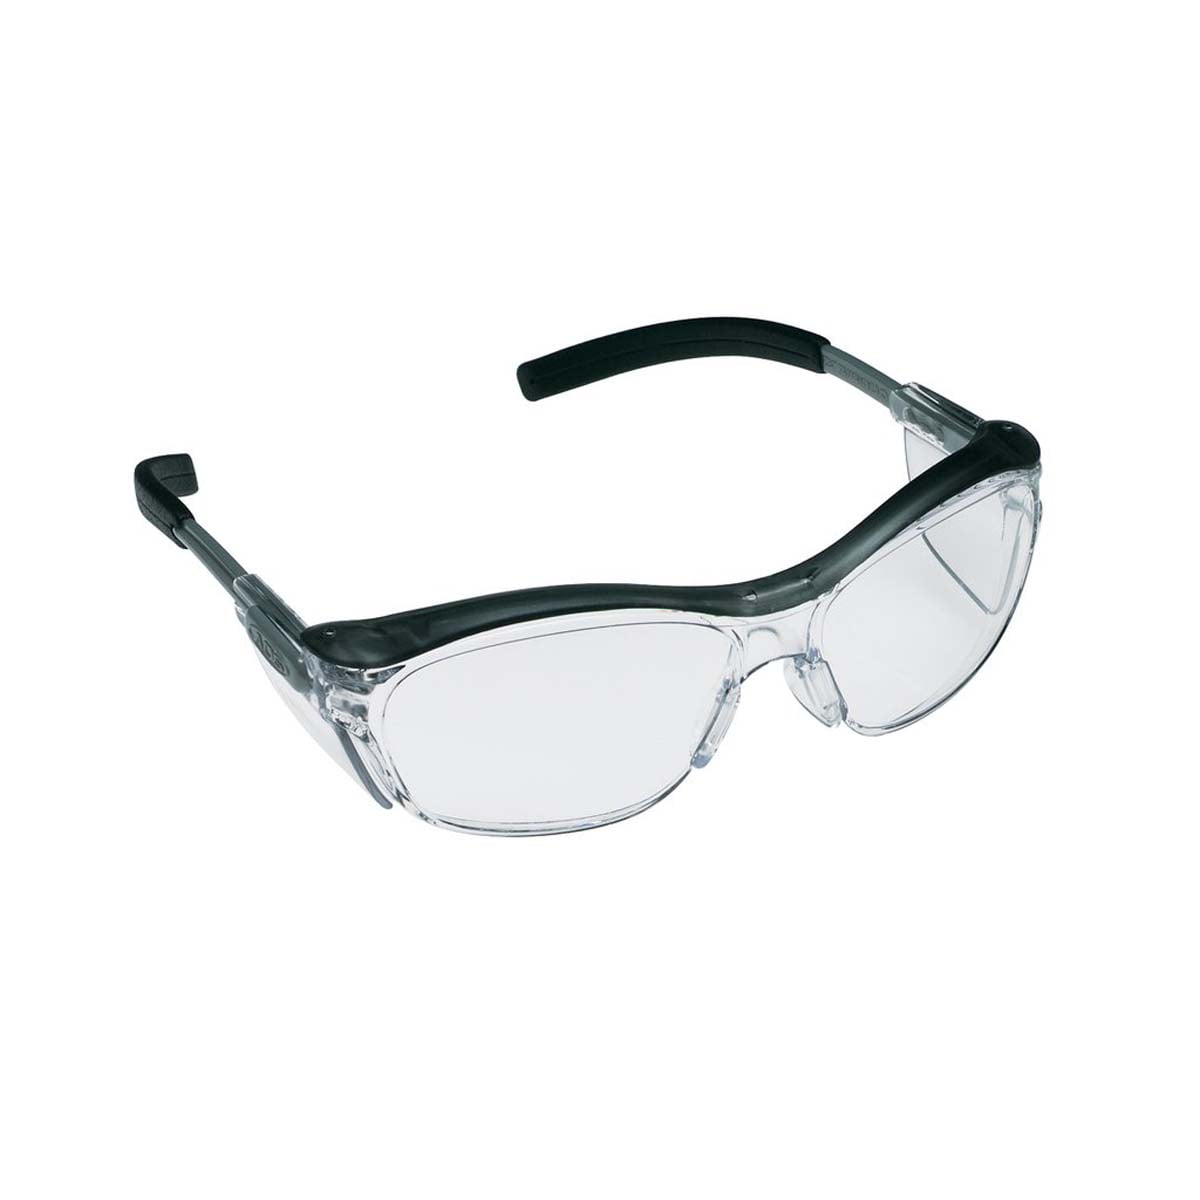 3M Bifocal Safety Read Glasses,+1.50,Gray 11500-00000-20